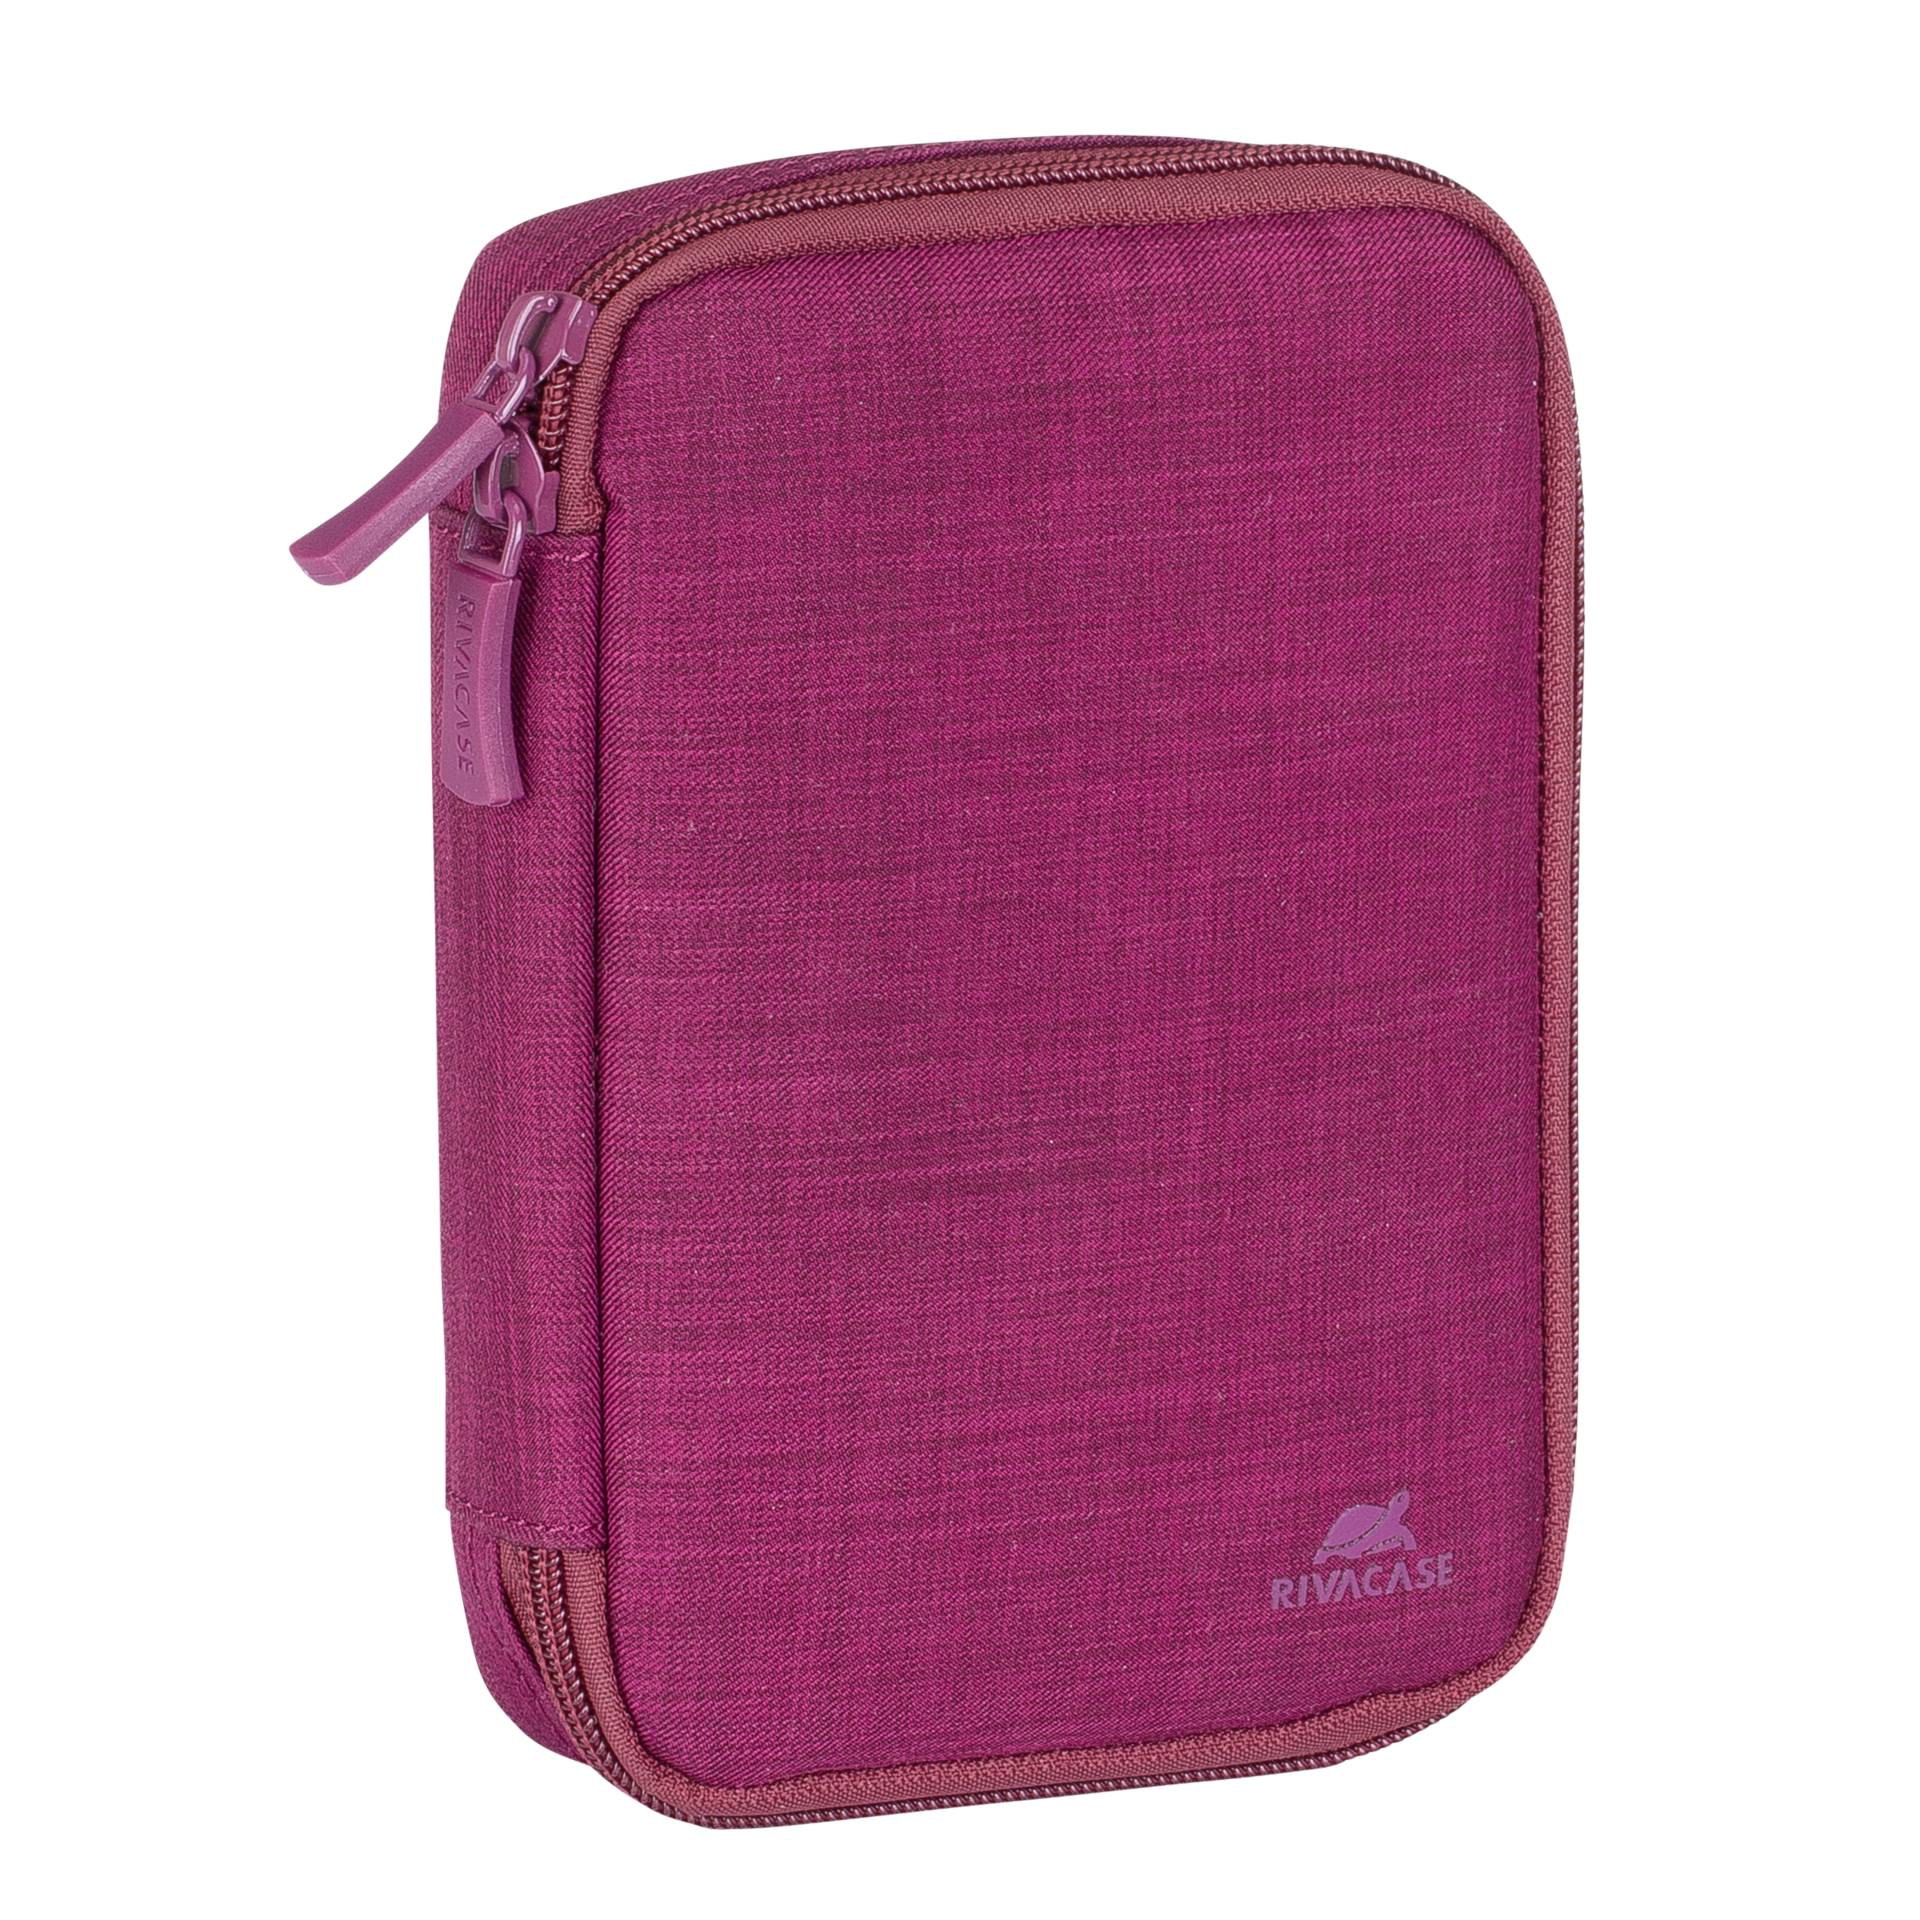 Rivacase 5631 Personal Organizer Polyester Rot